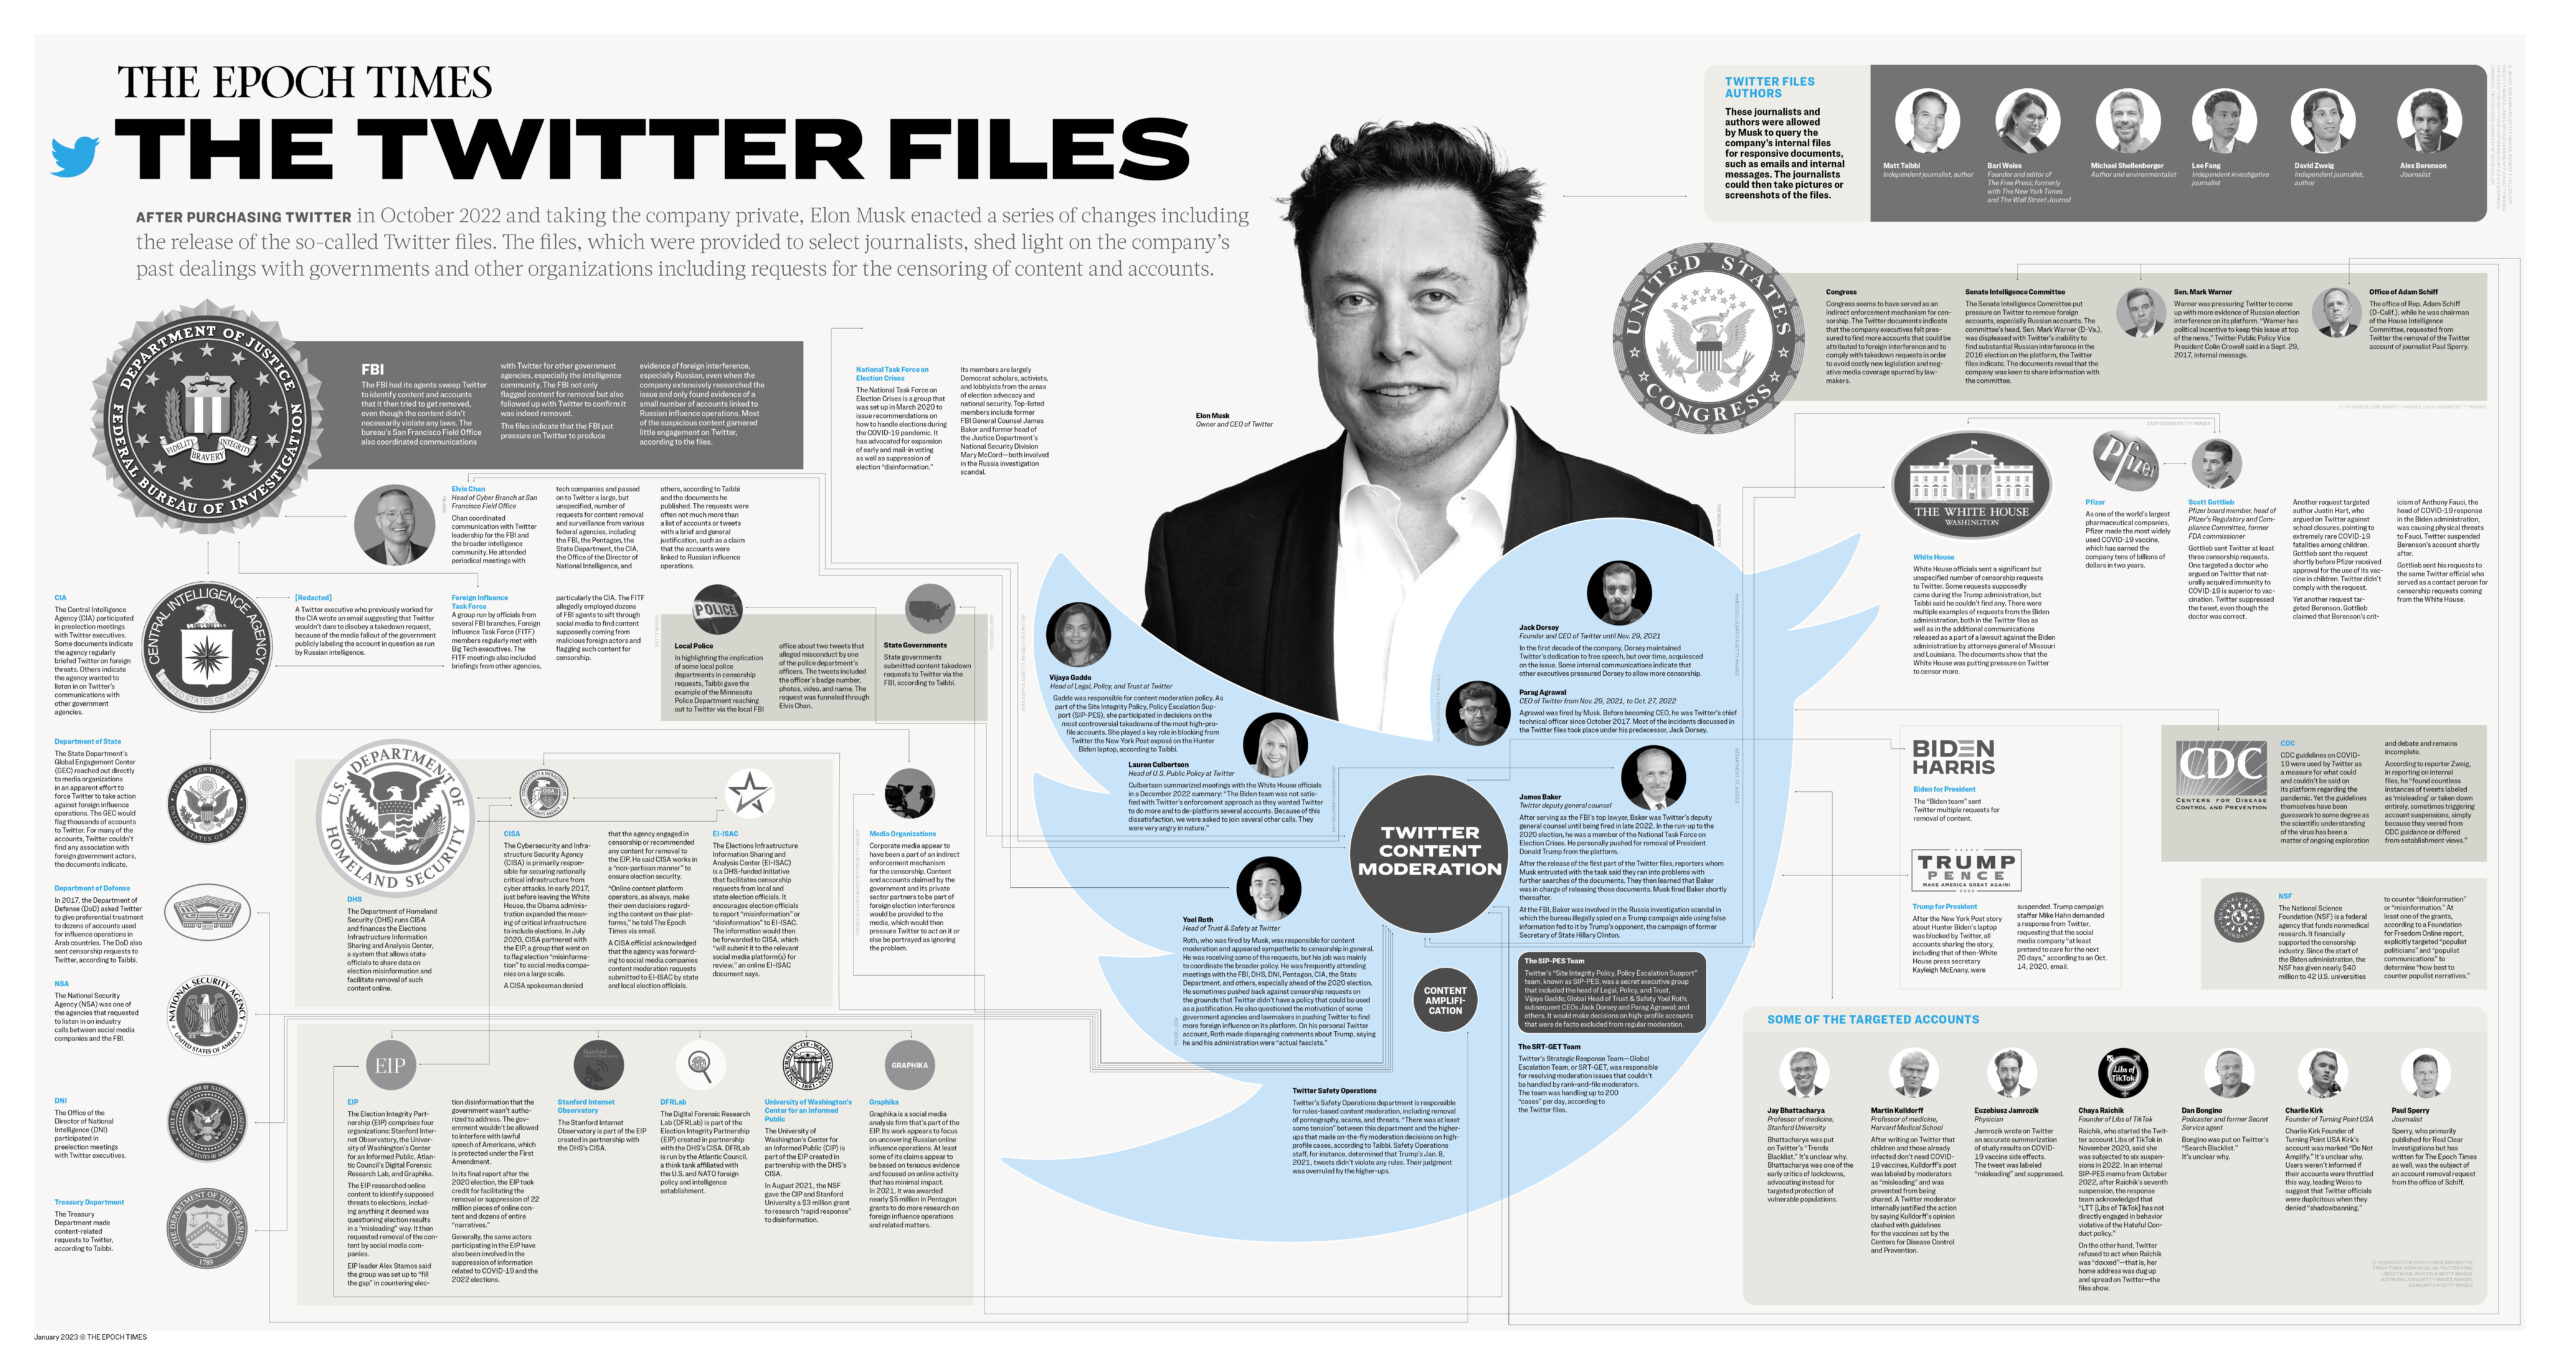 The Epoch Times: The Twitter Files Infographic